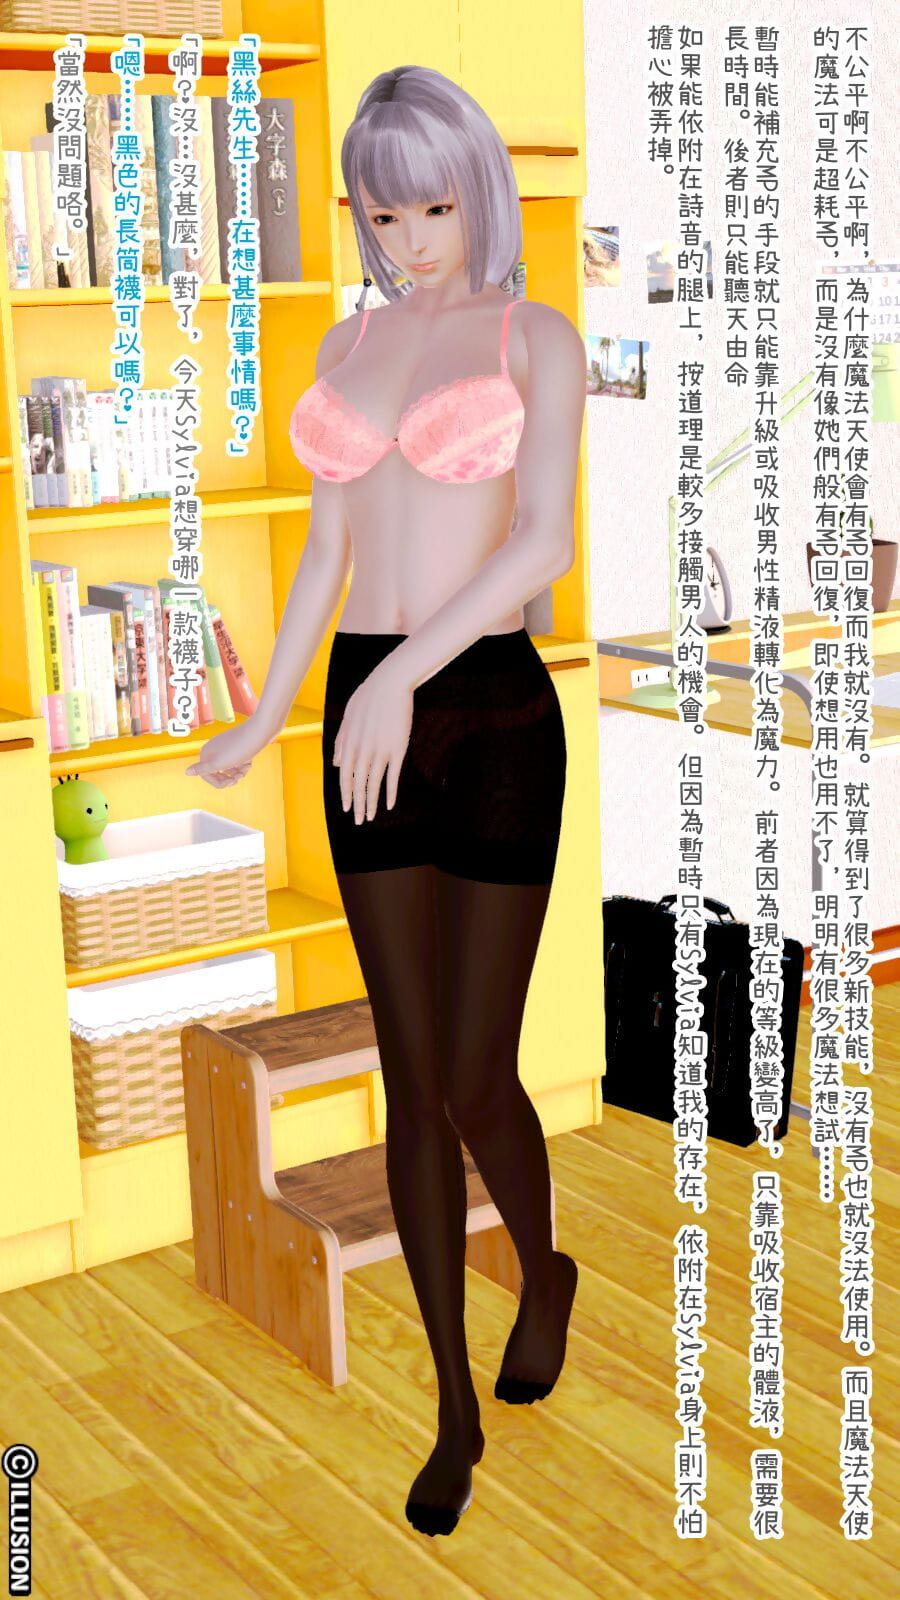 How can a creep like me reincarnate as a pantyhose 身為低級戰鬥員的我轉身成絲襪是甚麼玩法？！ Chapter 7 page 1